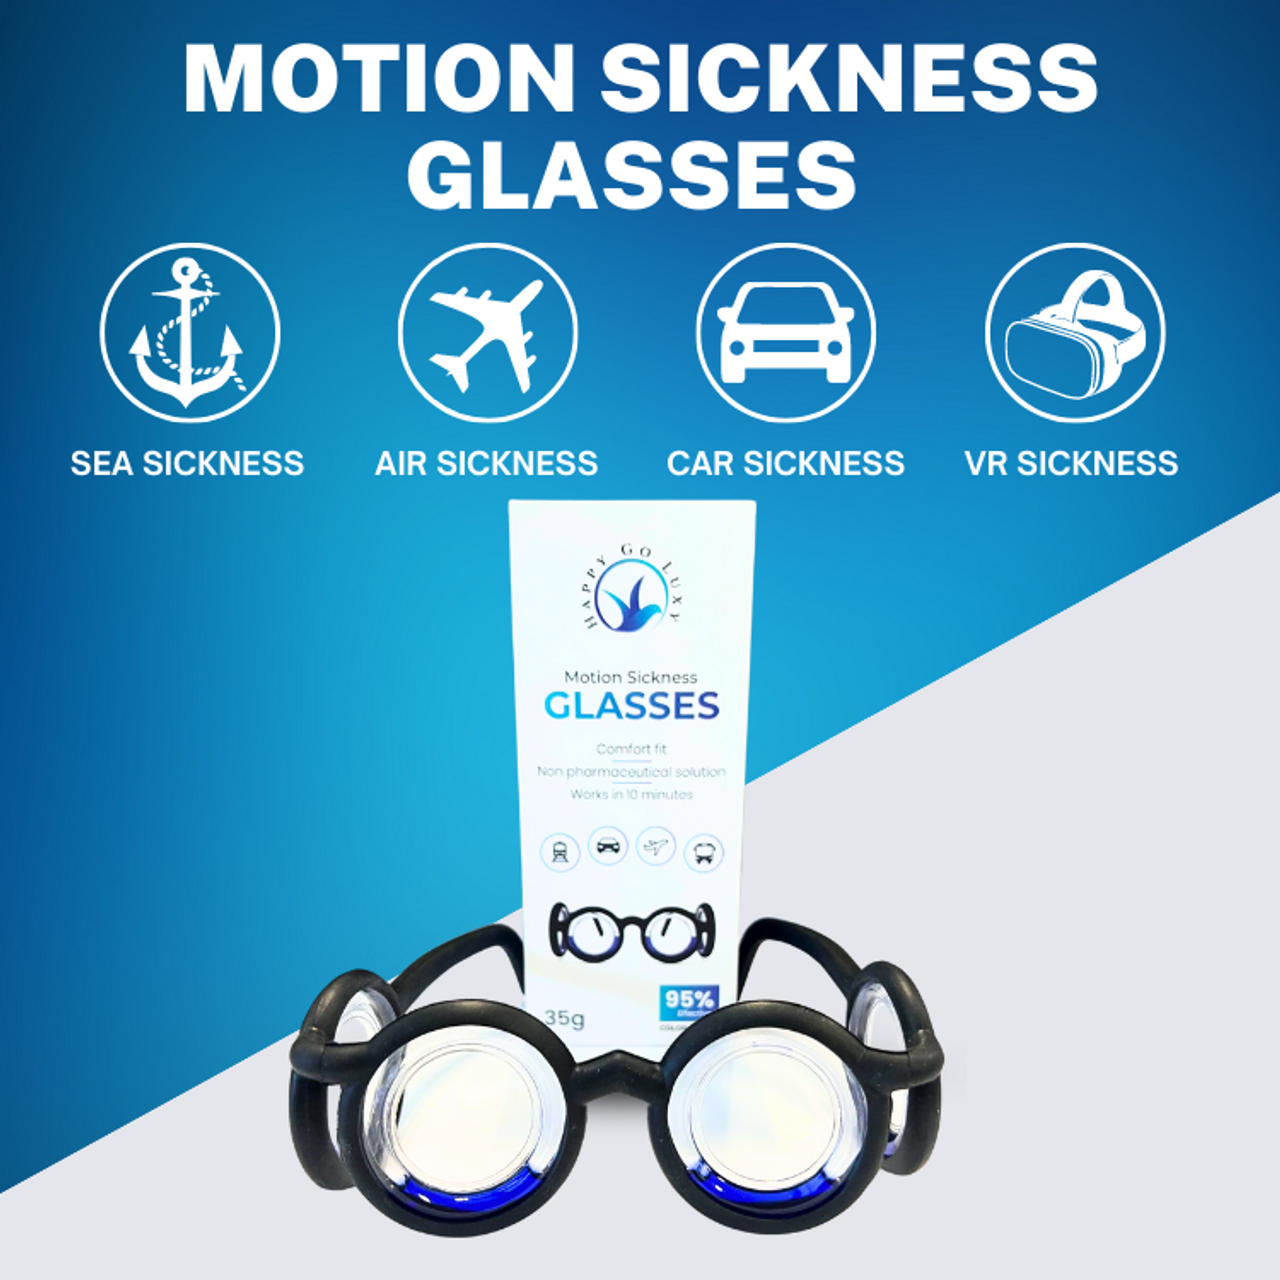 MOTION SICKNESS GLASSES COMFORT FIT IN POUCH